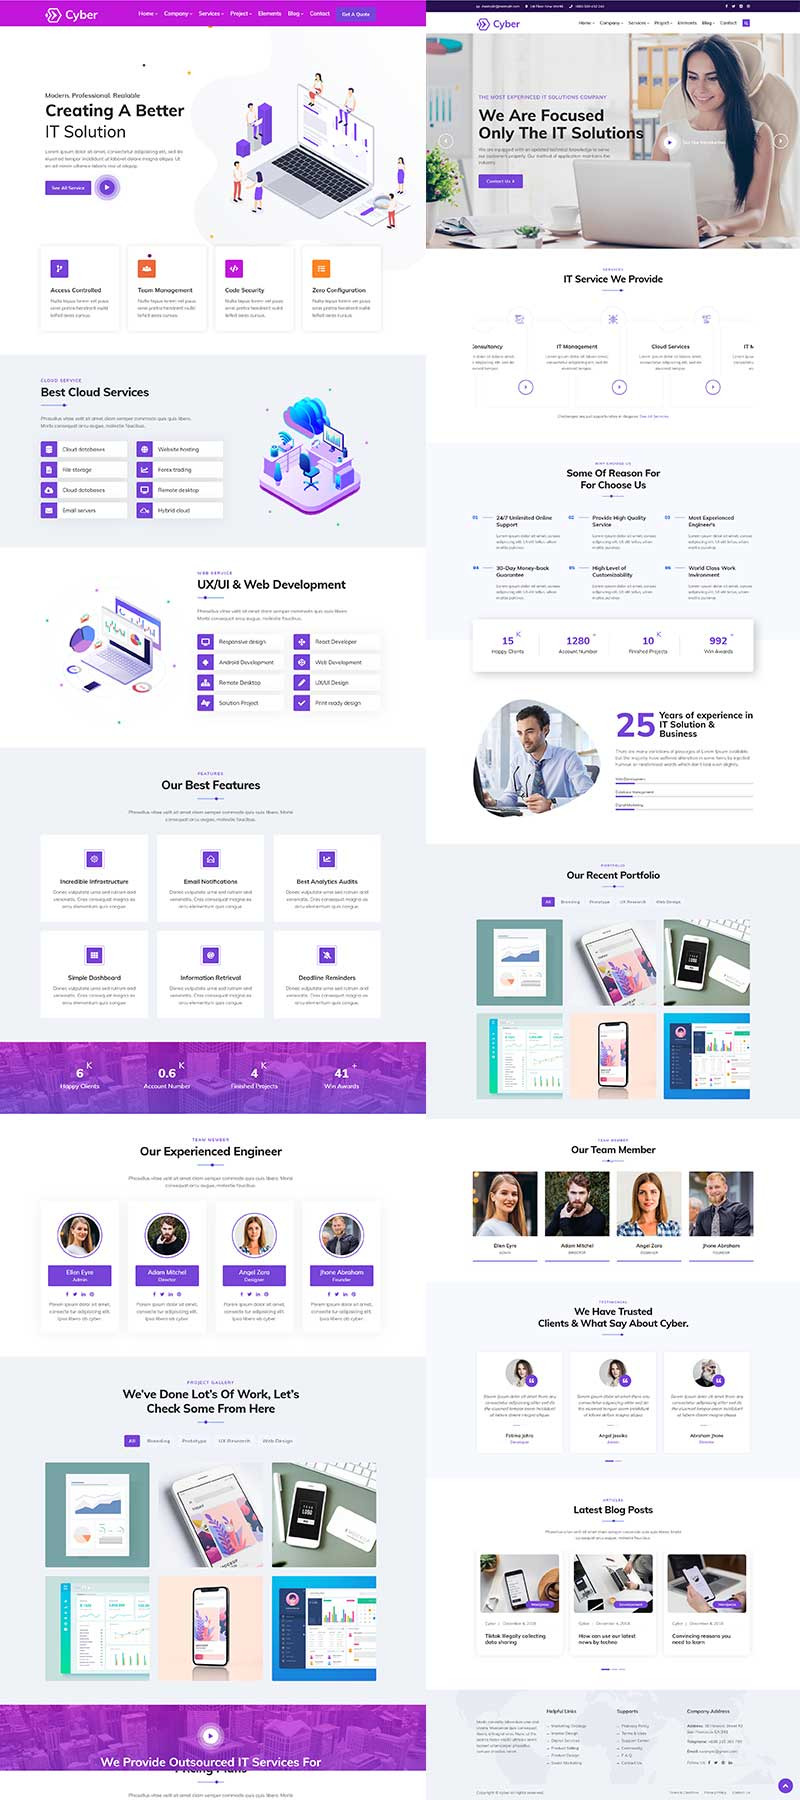 Colection of purple and white pages of cyber it solutions & multi-purpose wordpress theme.